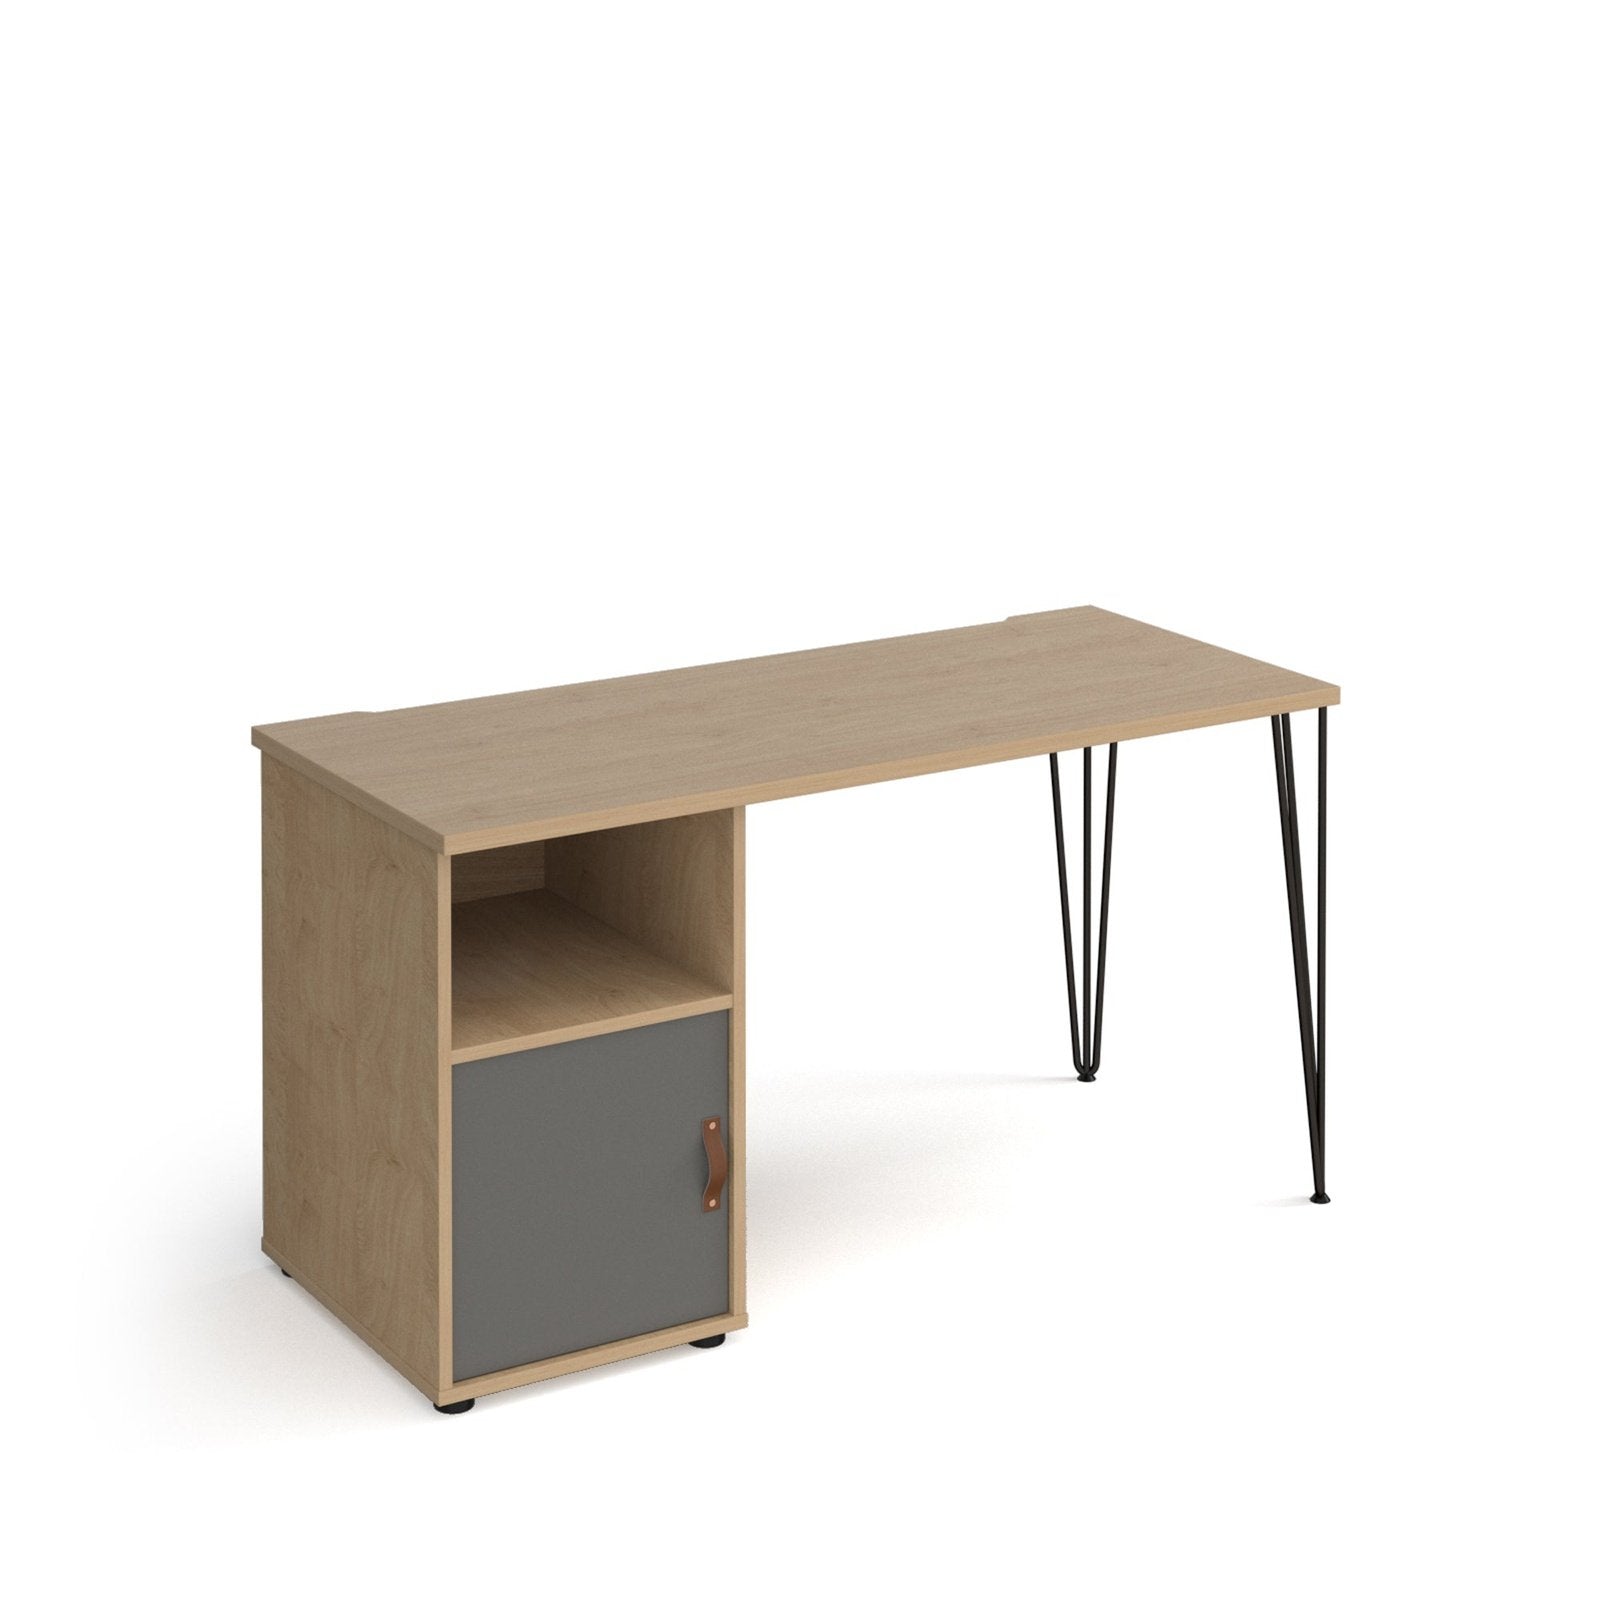 Tikal straight desk 1400mm x 600mm with black hairpin leg and support pedestal - Office Products Online